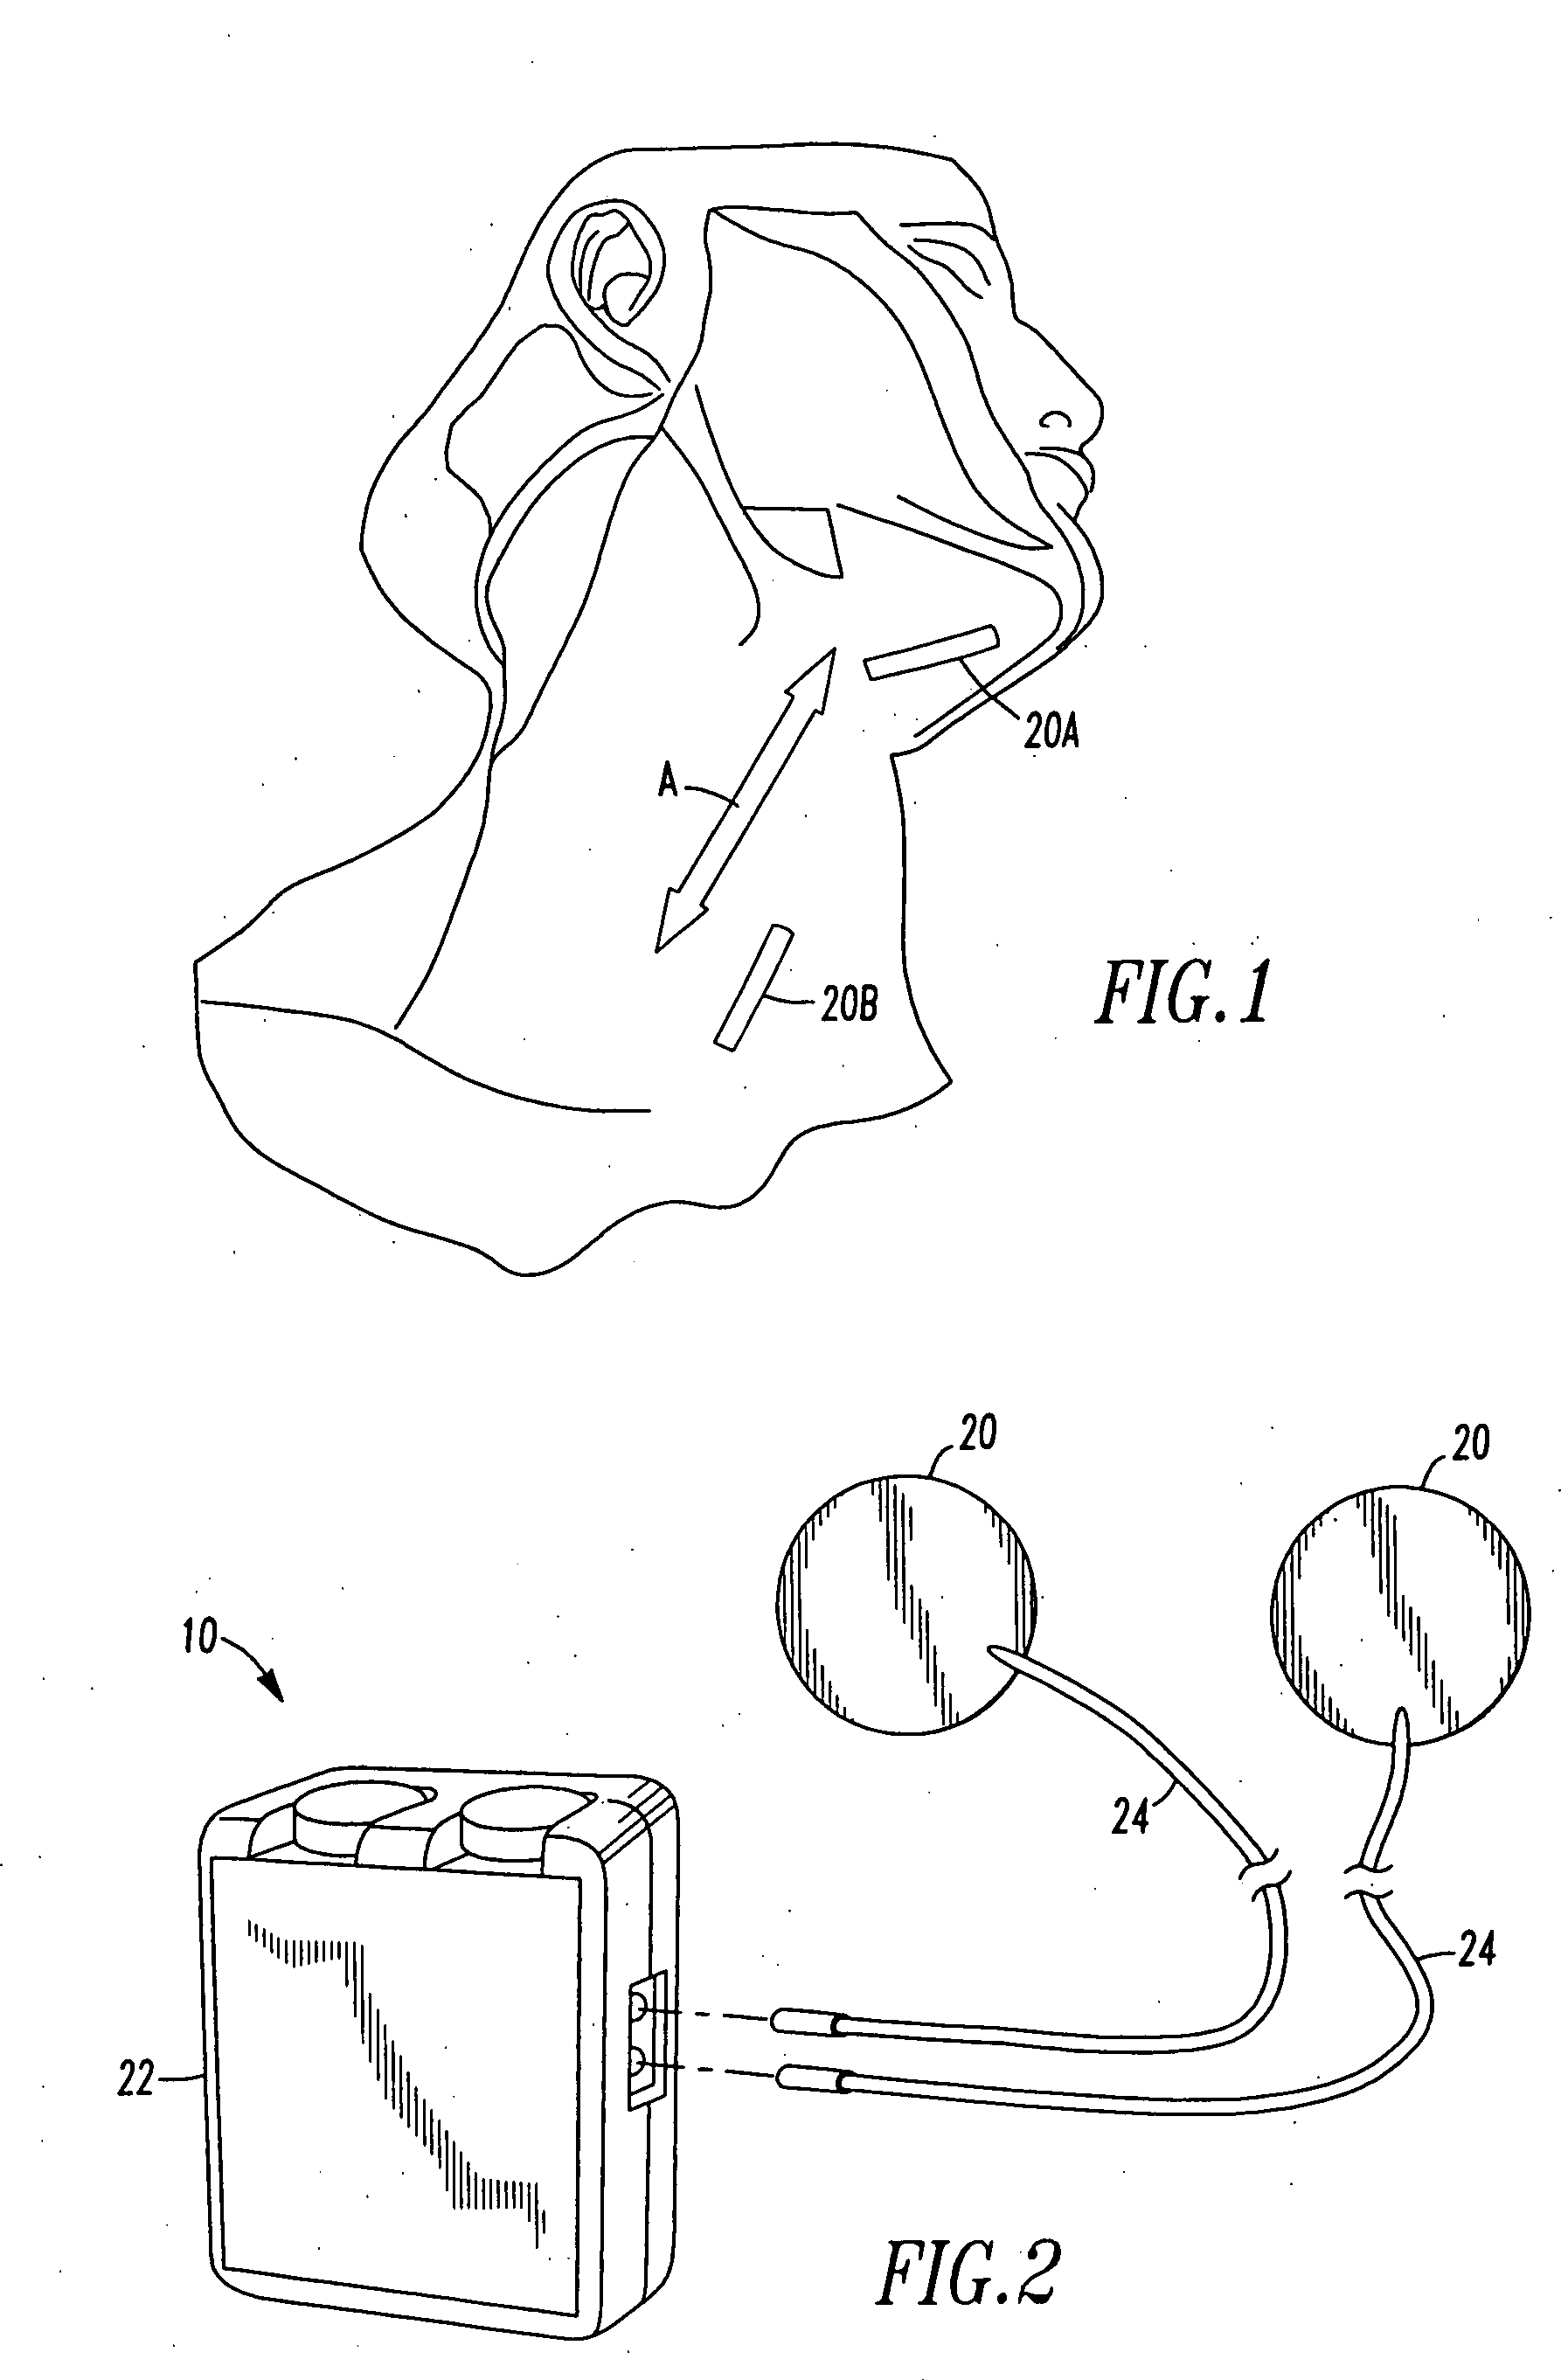 Method and device for the electrical treatment of sleep apnea and snoring